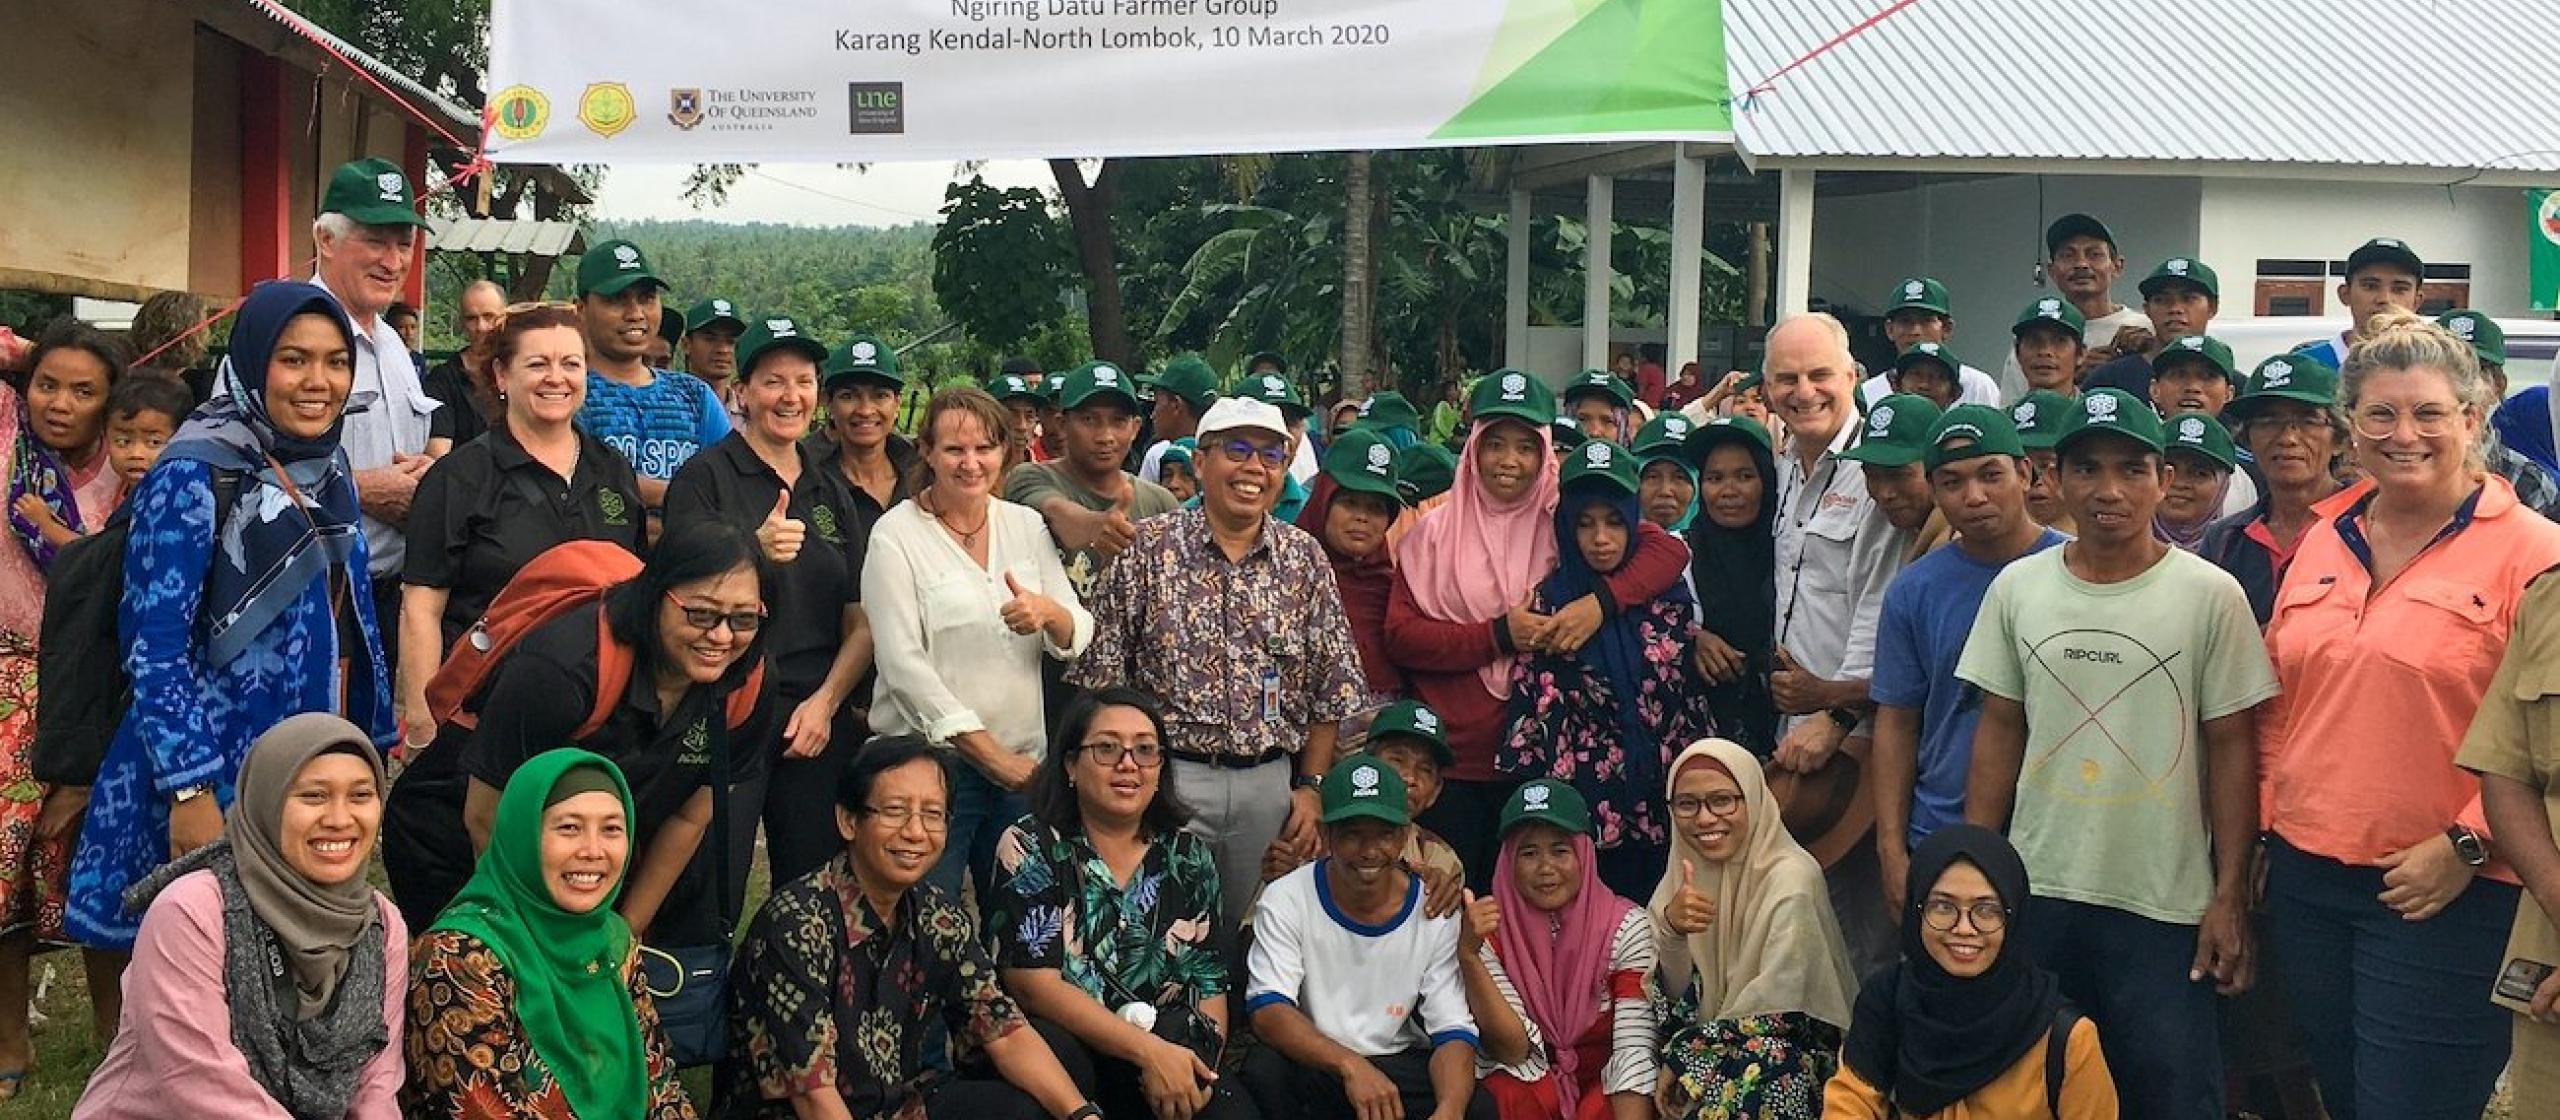 Australia’s Commission for International Agricultural Research is welcomed by locals at Karang Kendal, North Lombok